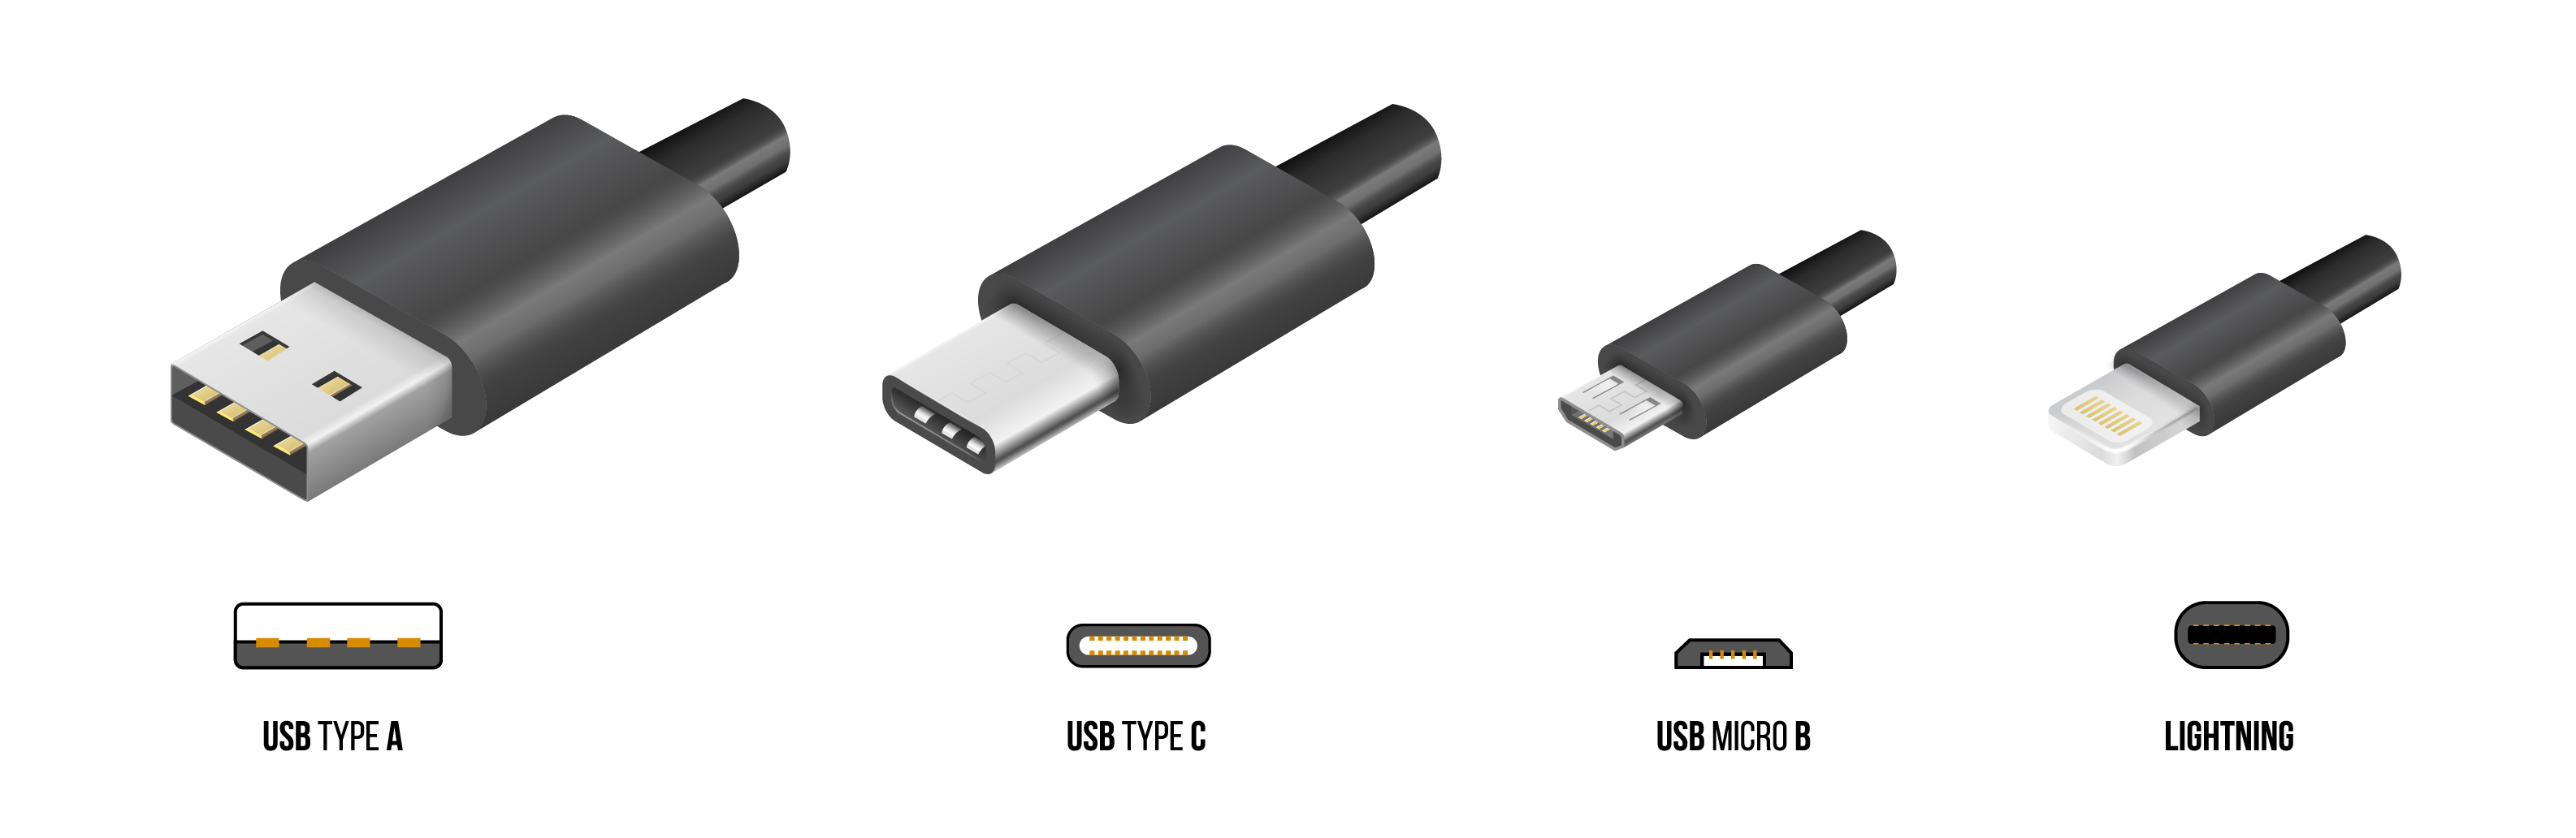 USB-A vs. USB-C: What's the Difference? + What's Best?